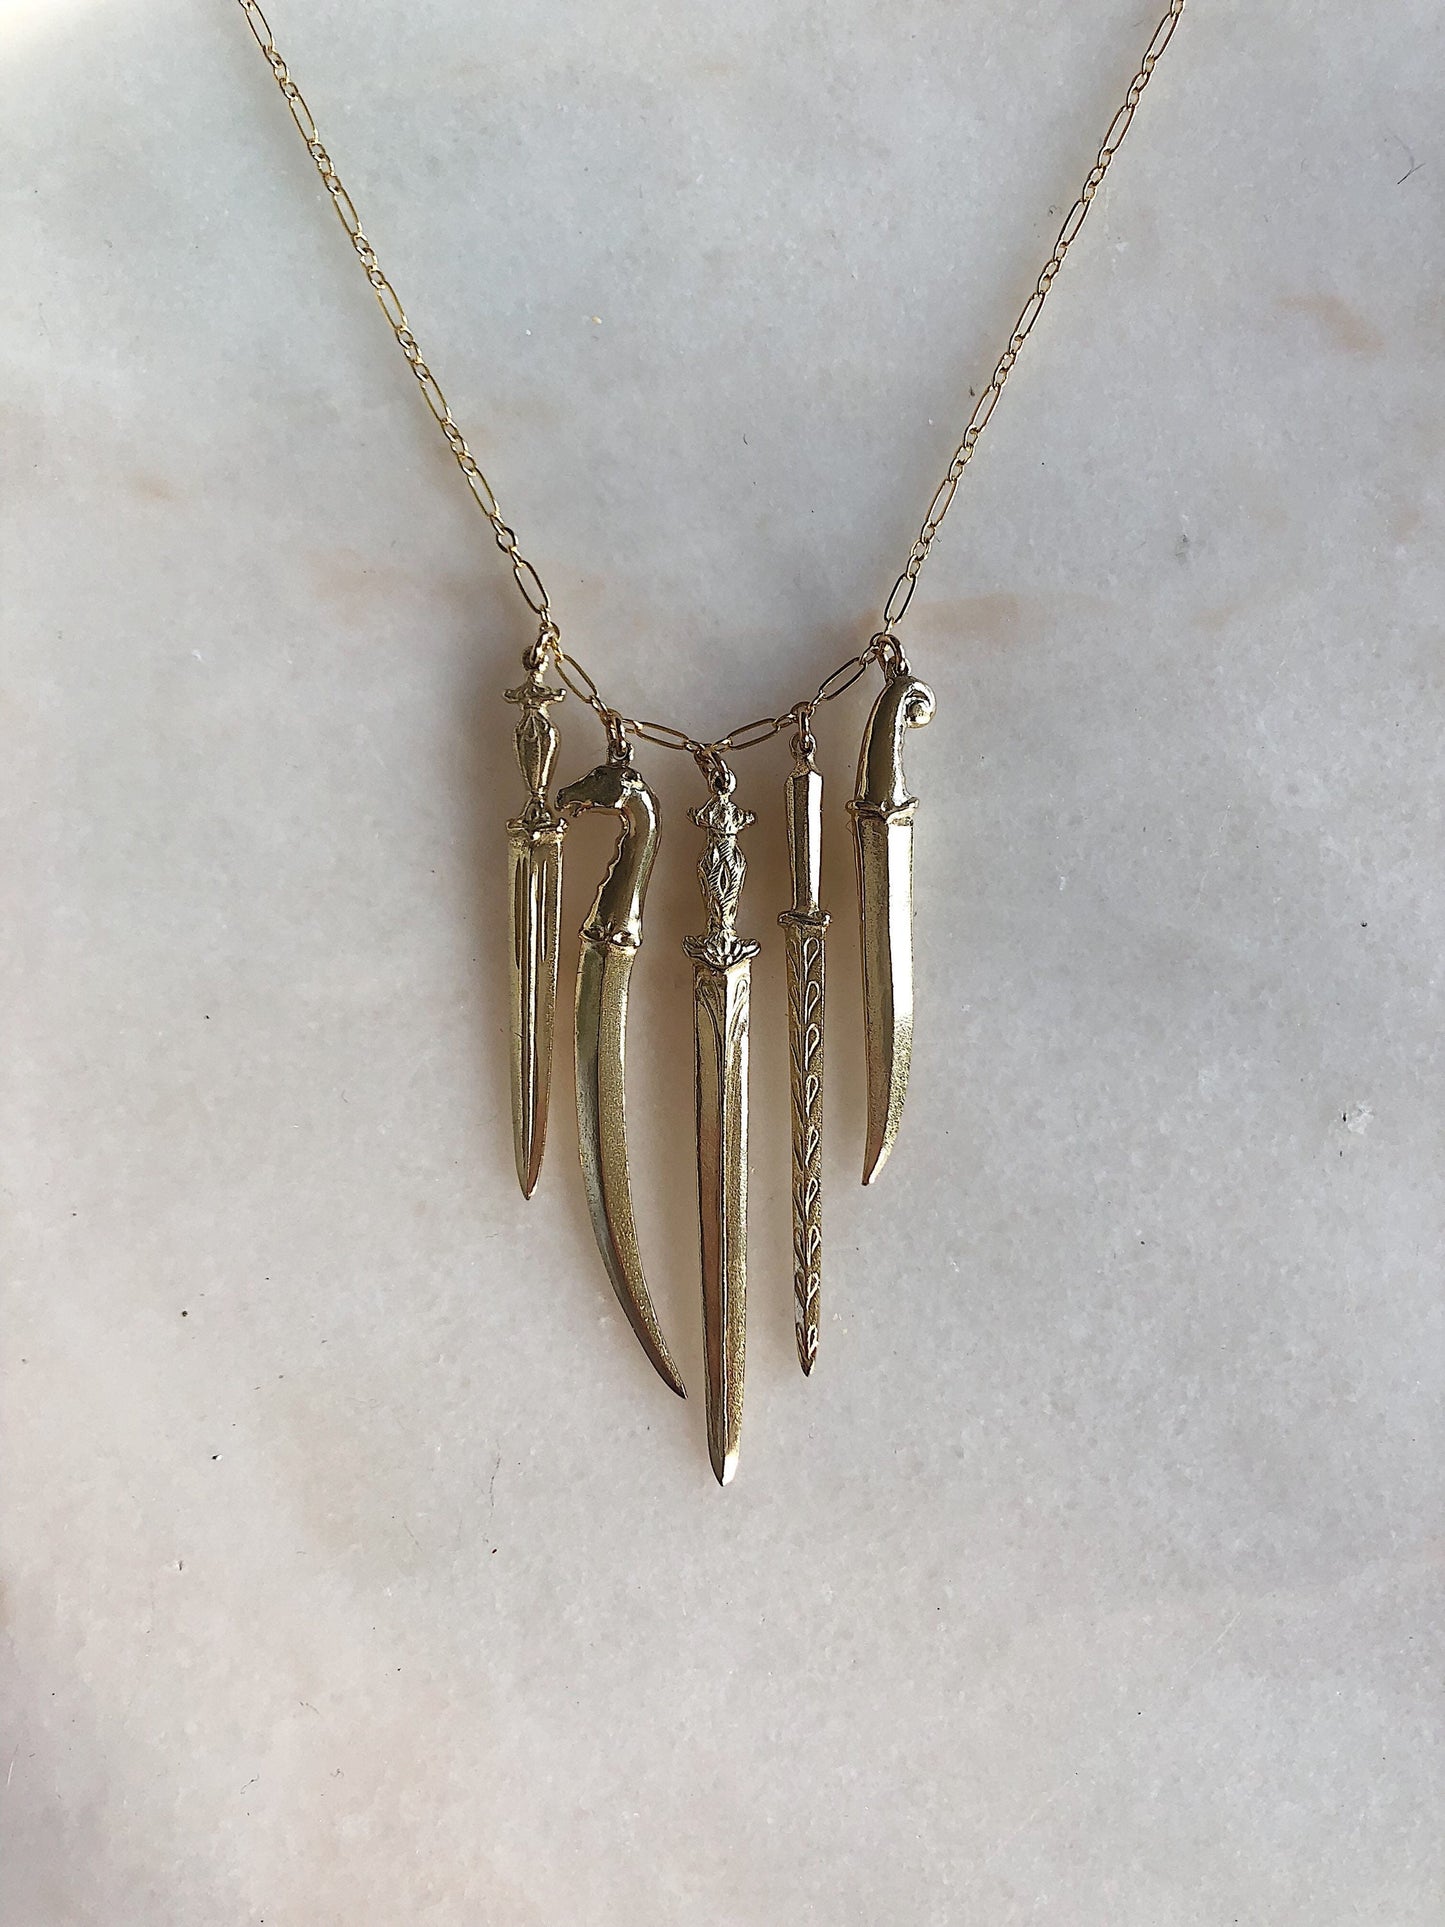 The Ceremony // Five Dagger Necklace // 14k Gold